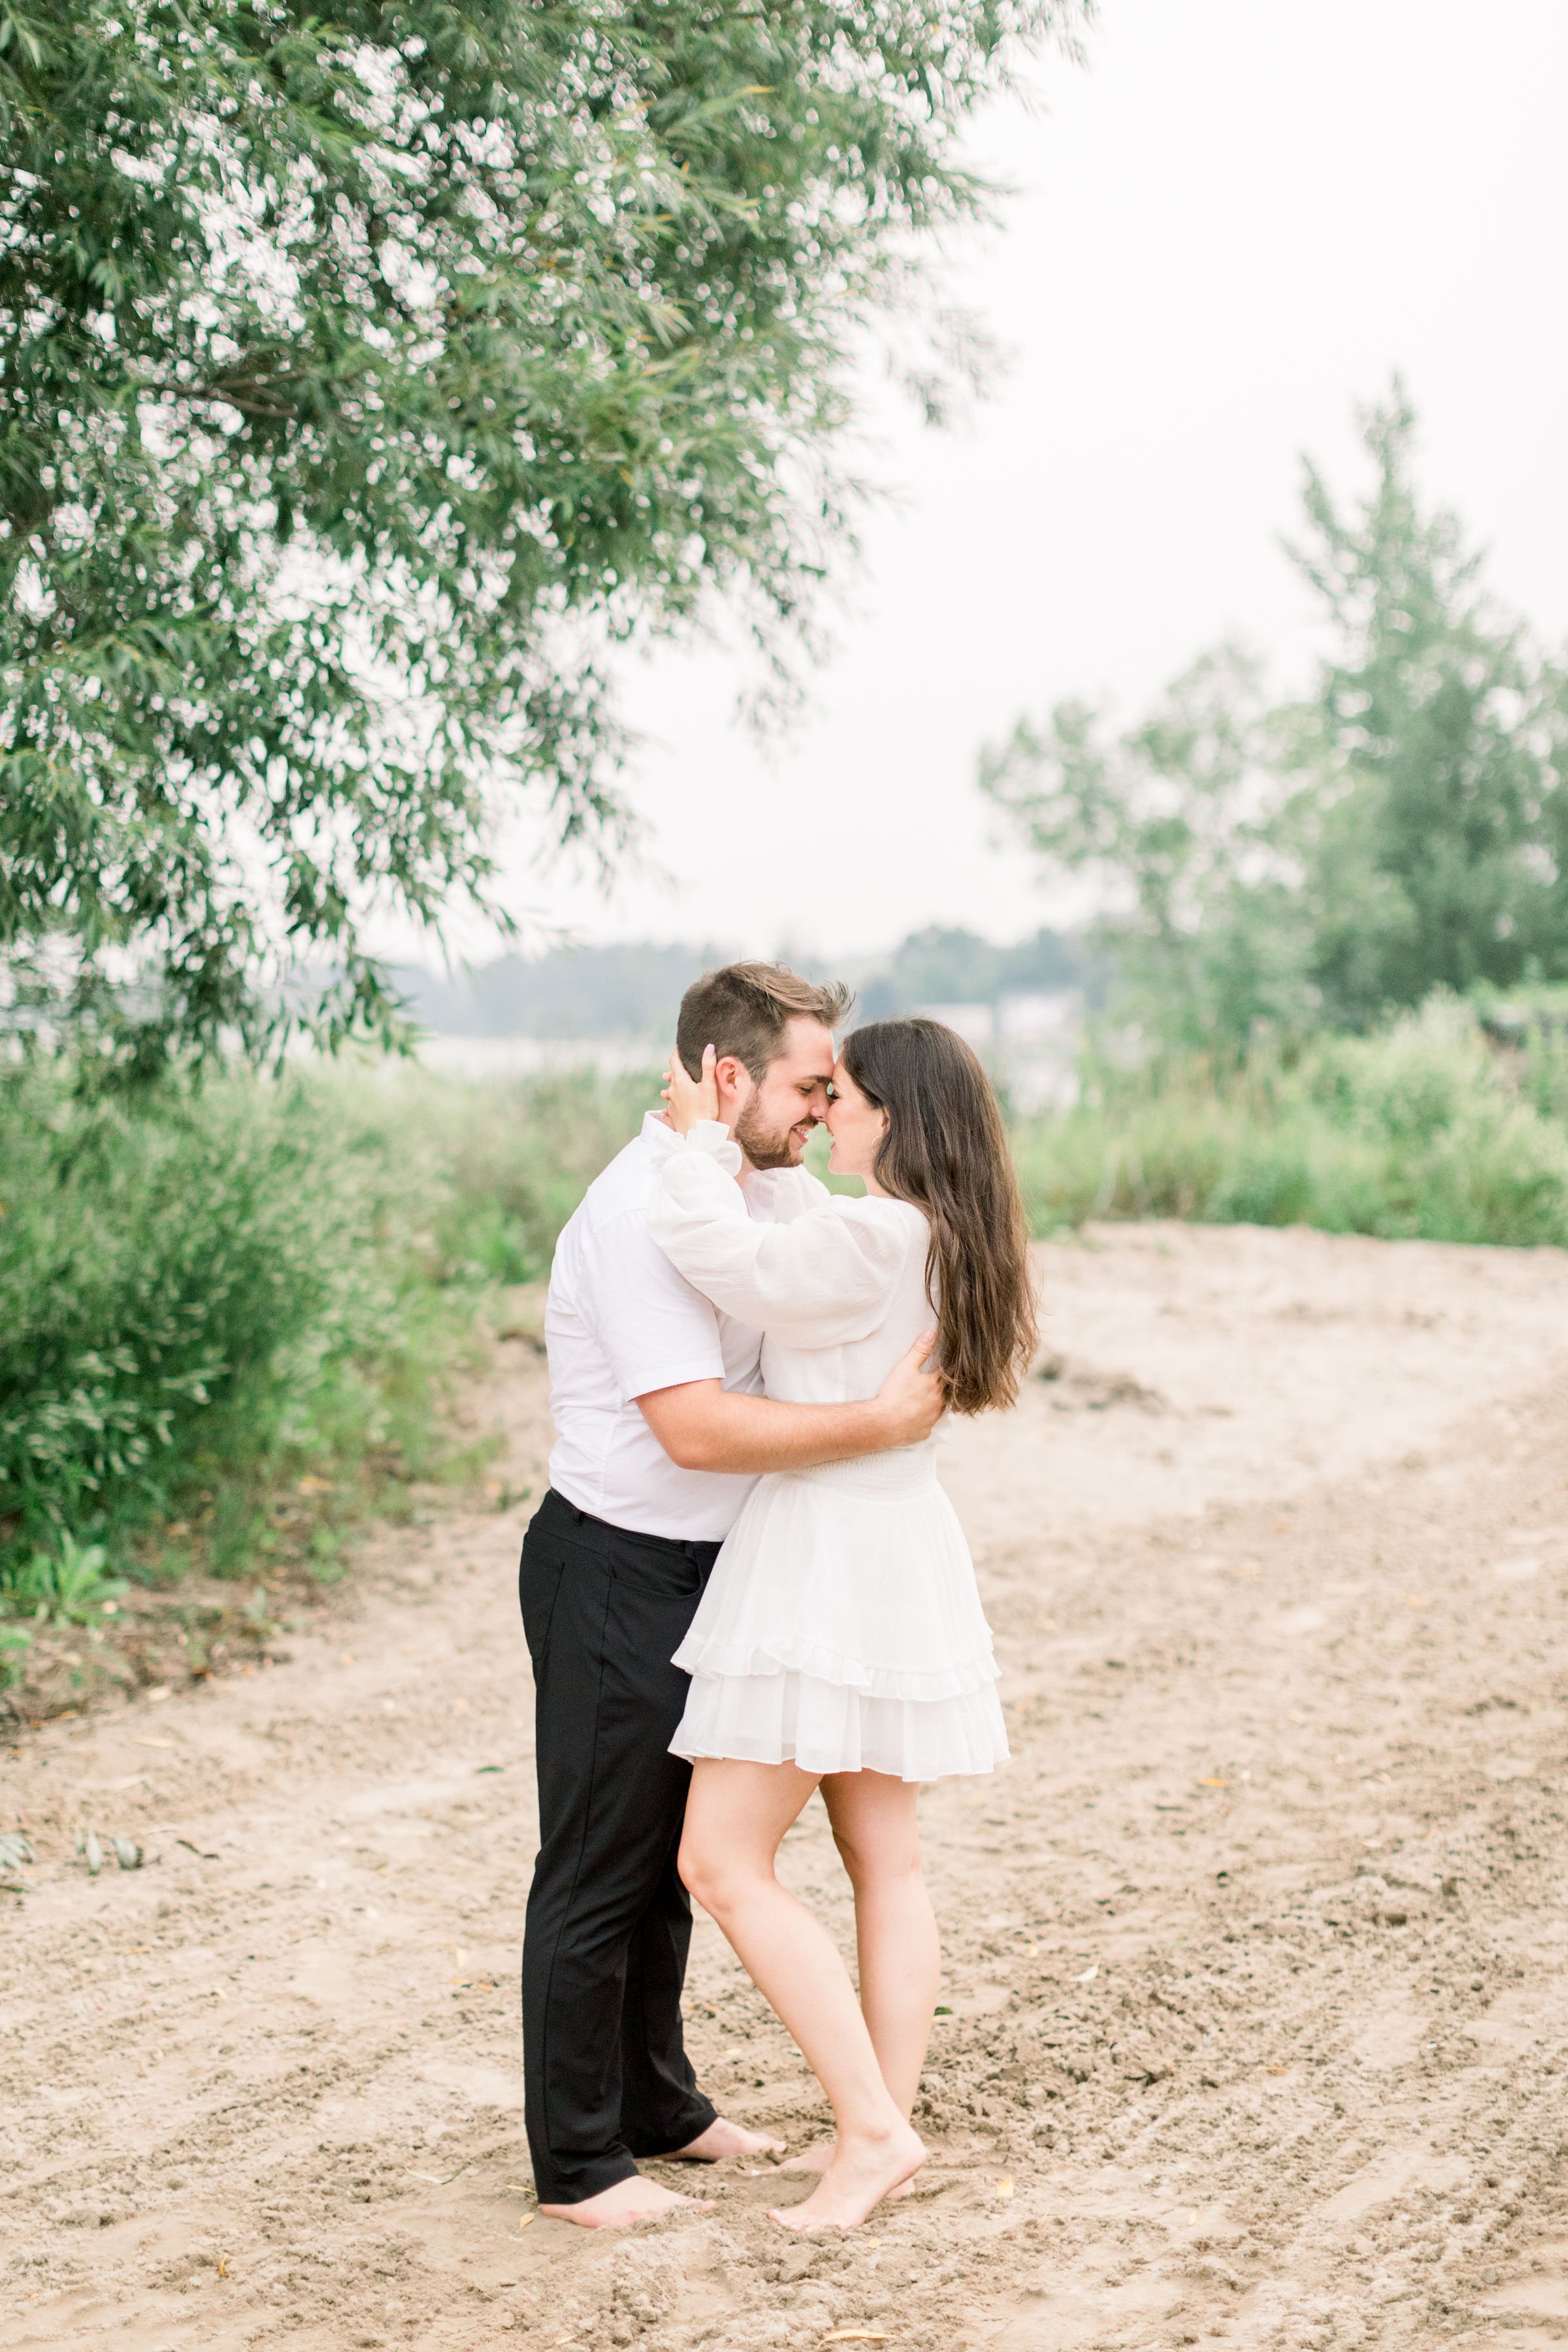  A woman goes in for a kiss during an engagement session with Chelsea Mason Photography. foreheads together leg pop kiss #Kingstonengagement #GrassCreekParkPortraits #Ontarioengagementphotographers #Chelseamasonphotography #Chelseamasonengagements 